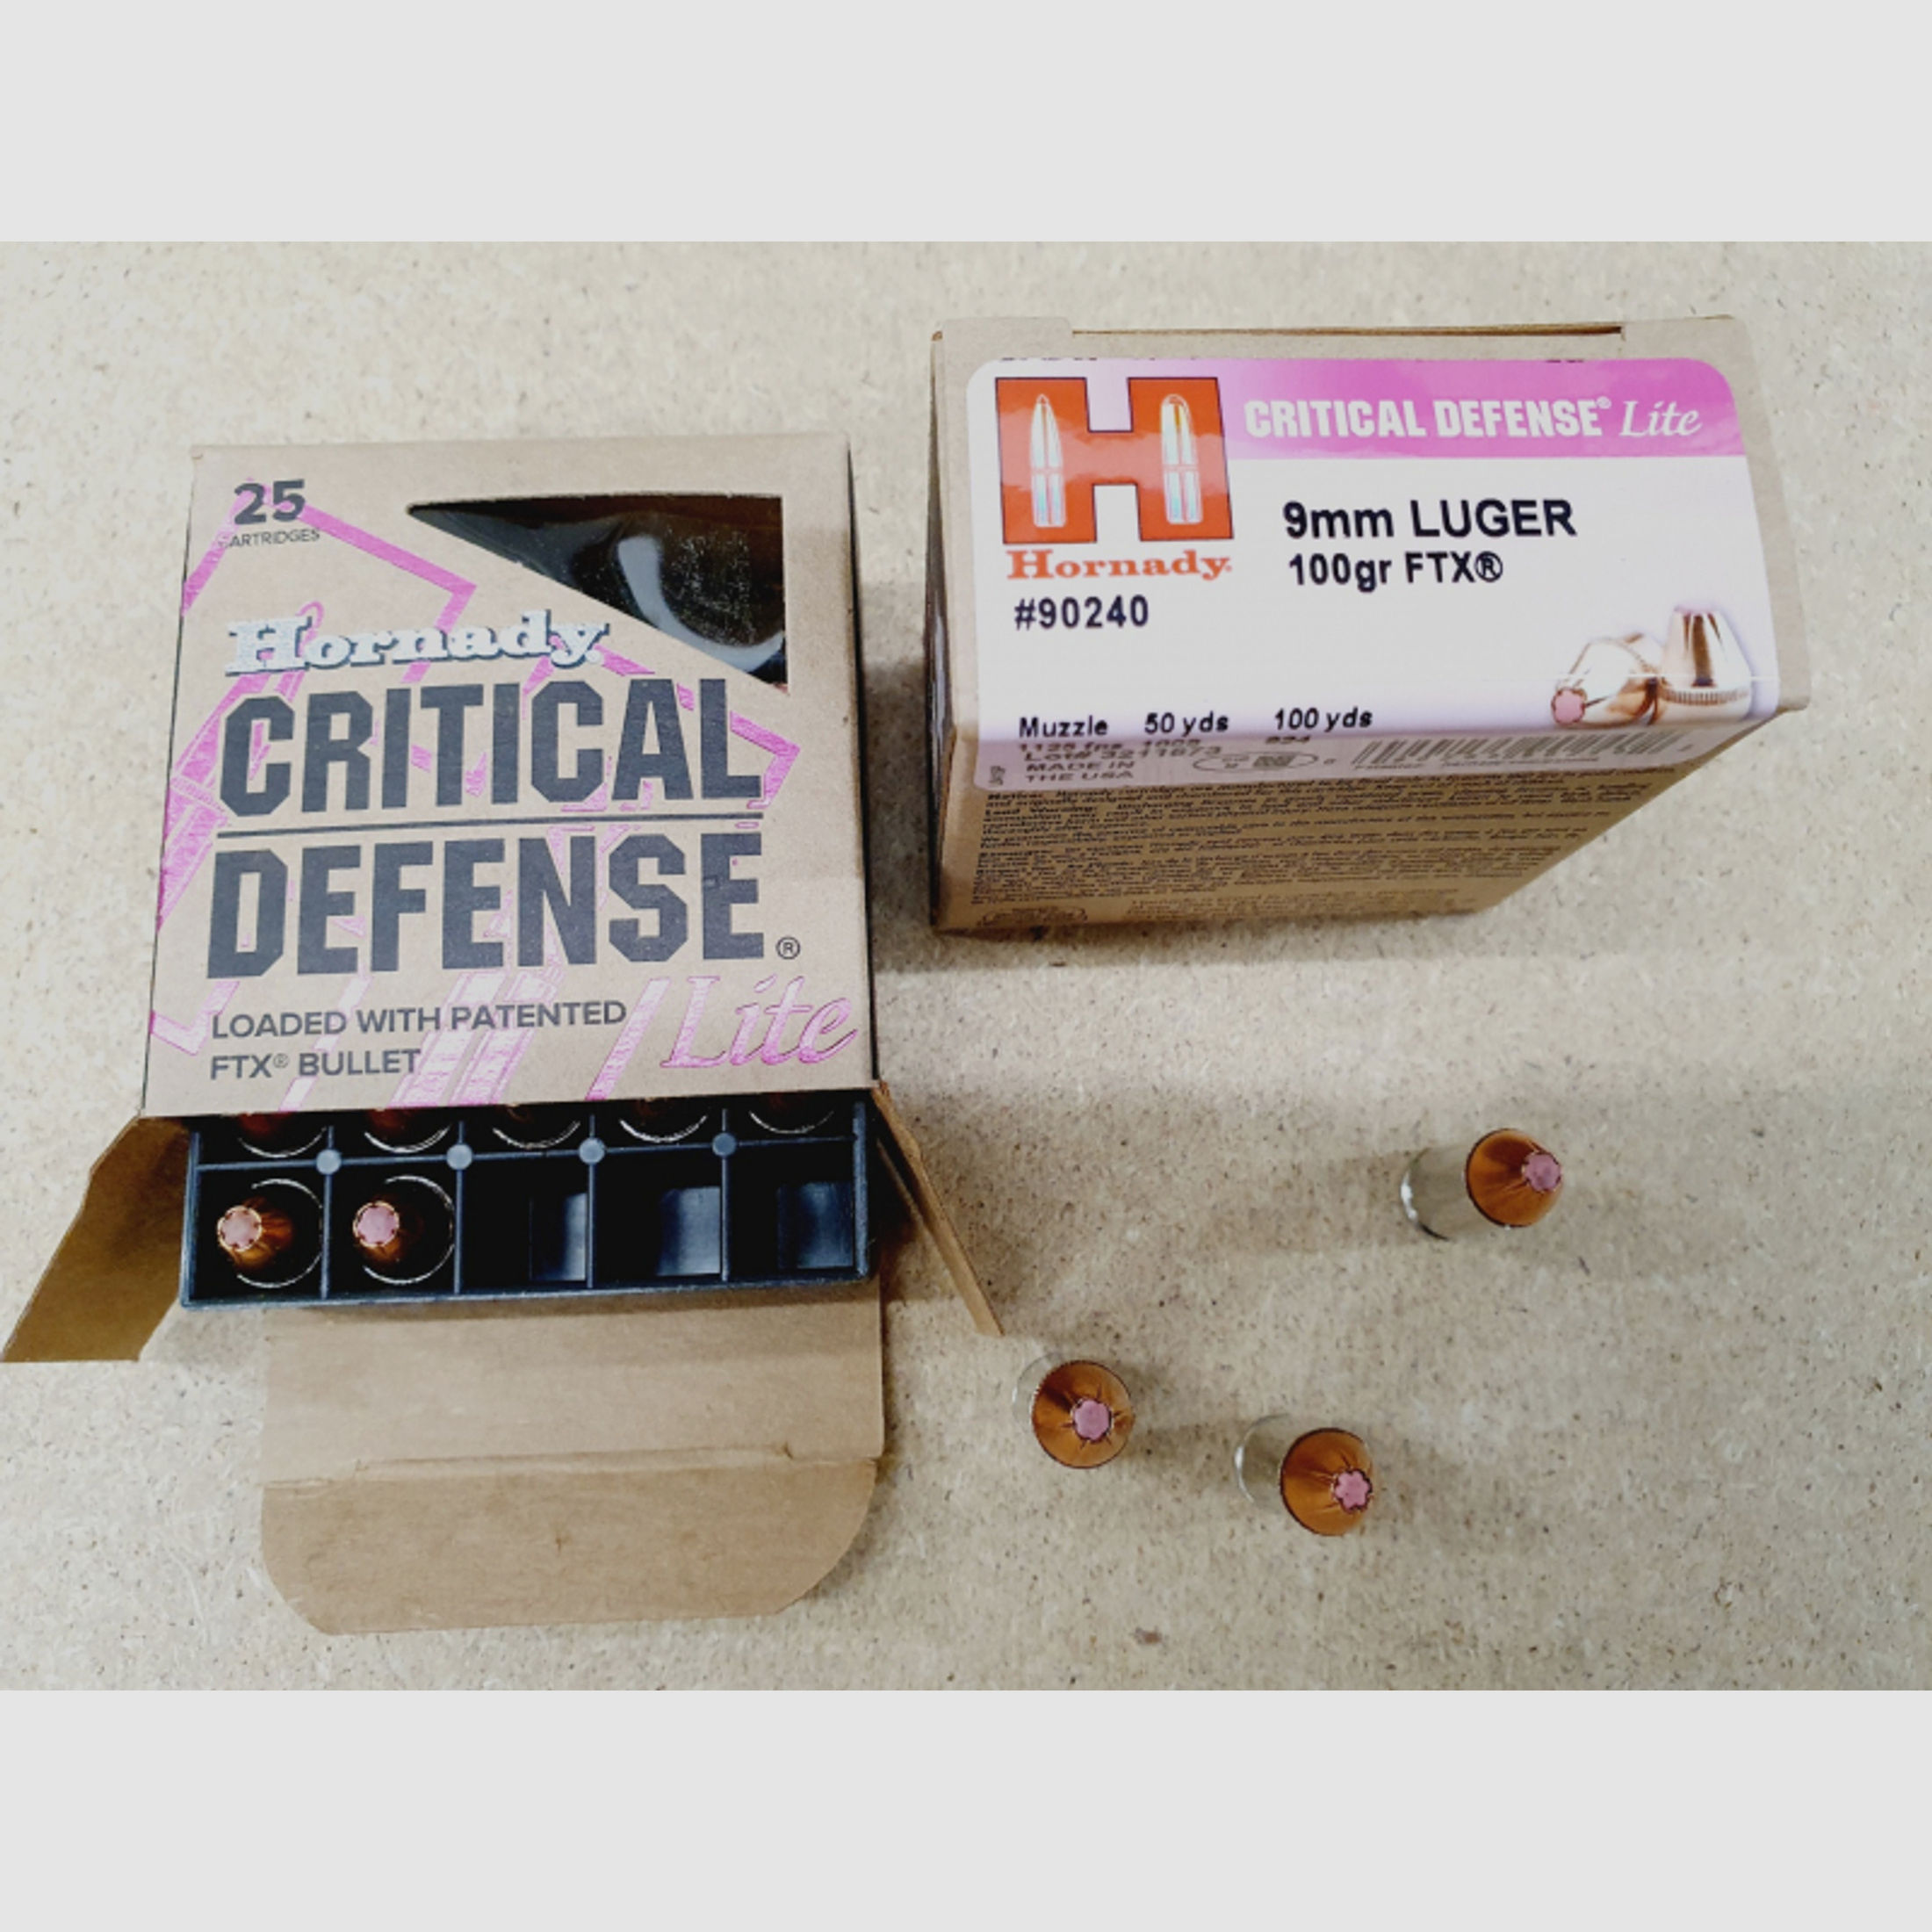 9mm/100grs FTX Hornady Critical Defence 25 Stk. #90240